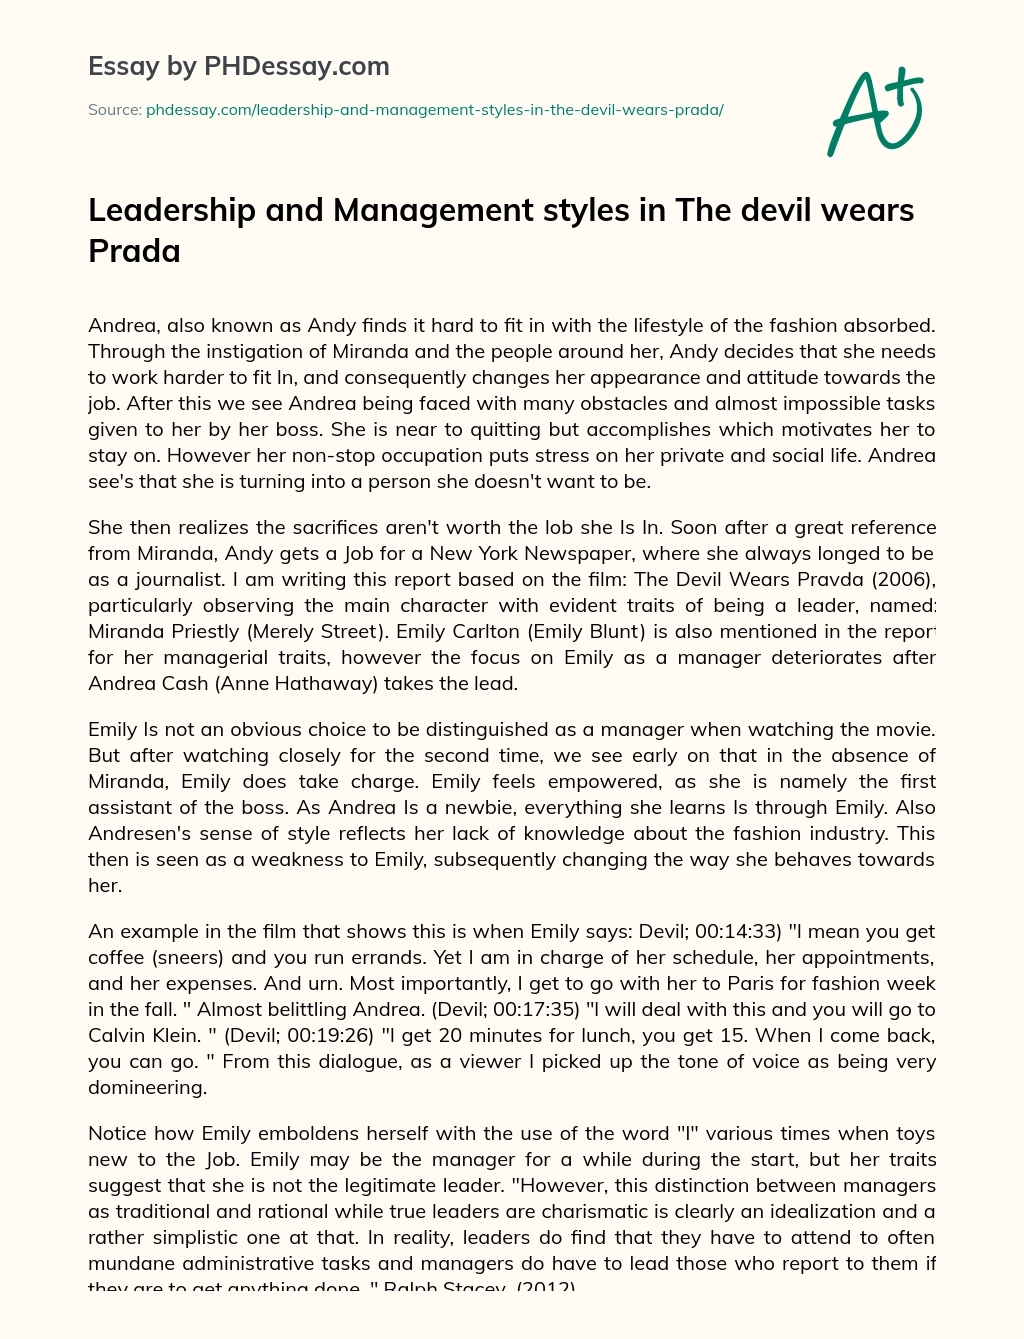 Leadership and Management styles in The devil wears Prada essay